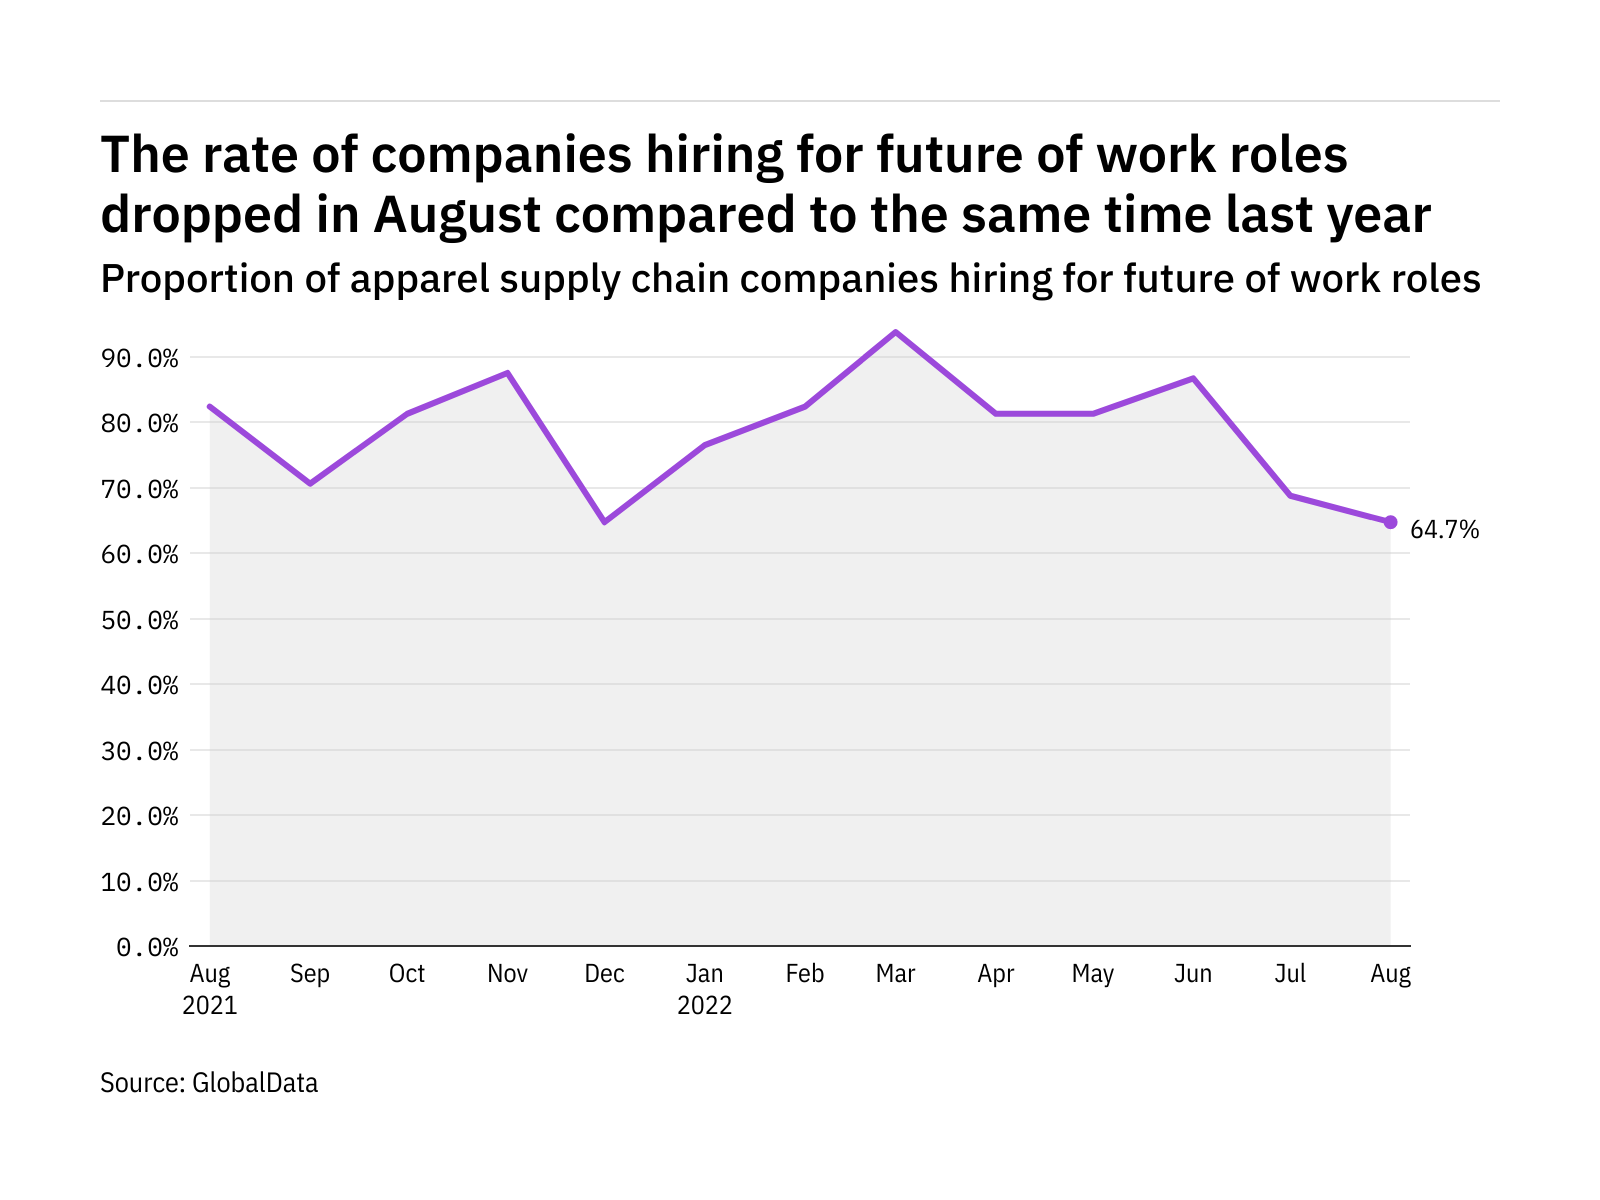 Future of work hiring levels in the apparel industry fell to a year-low in August 2022